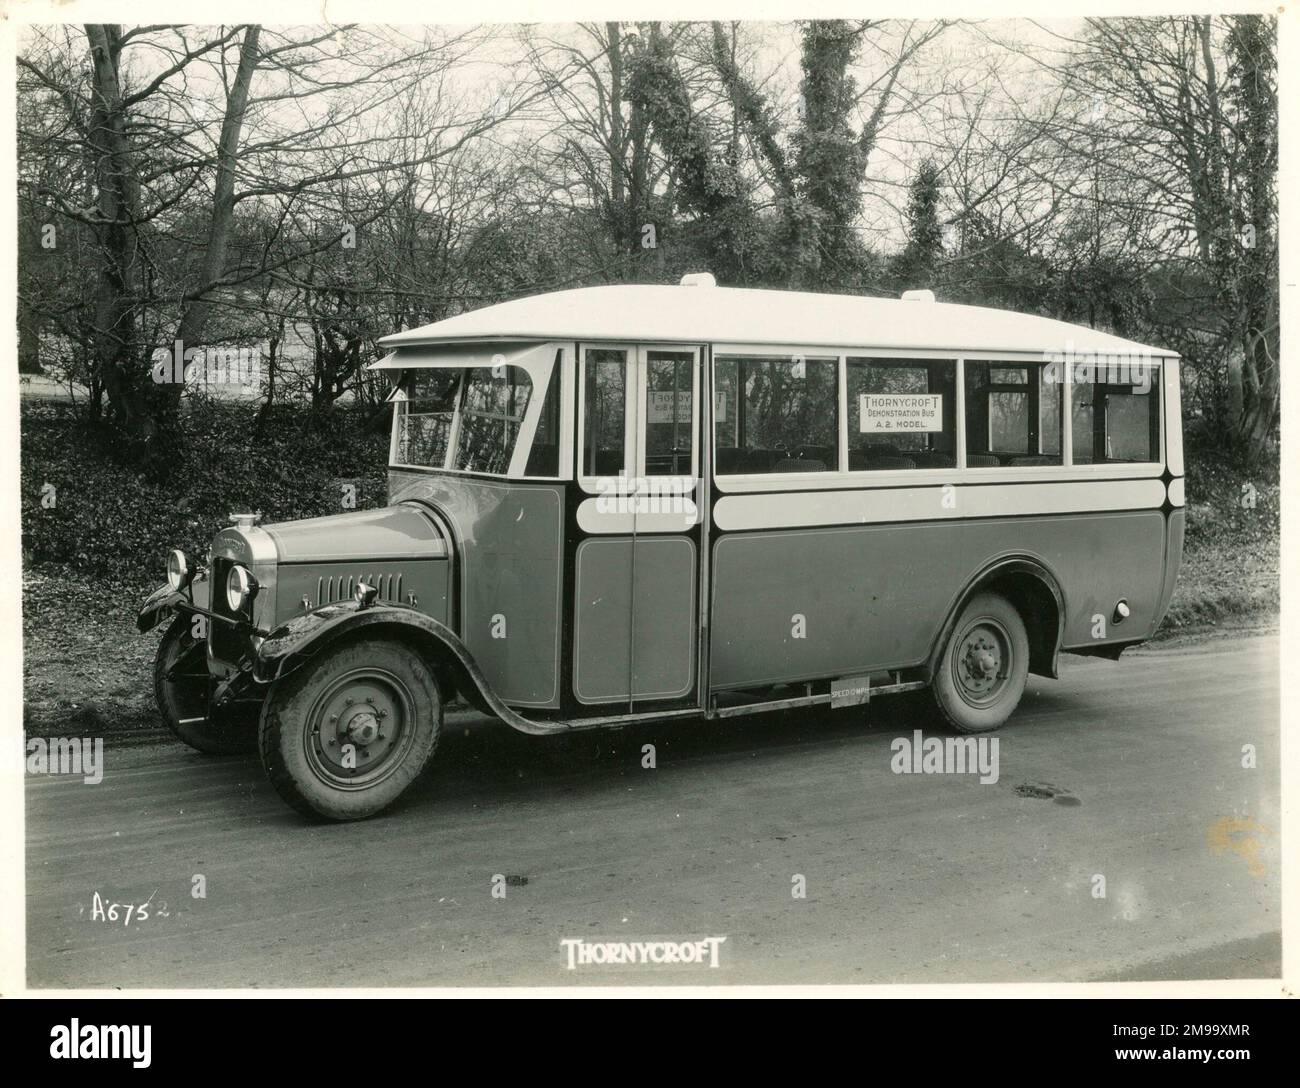 Thornycroft demonstration bus, A2 'Elysian' Northern Counties. Stock Photo